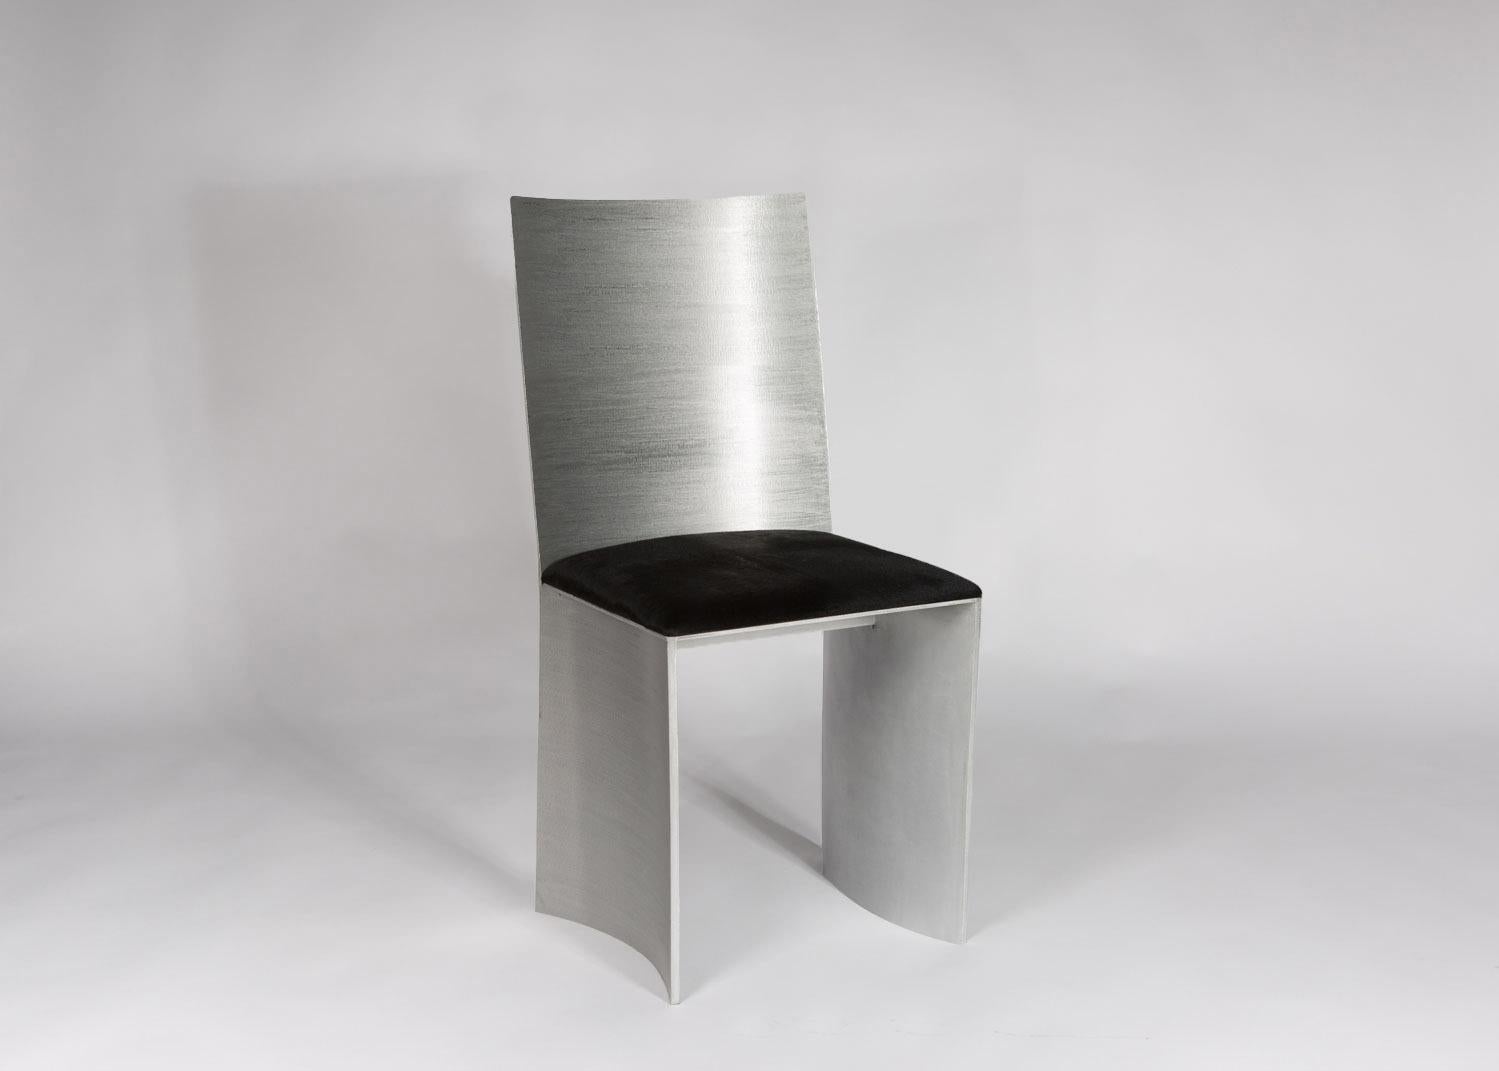 Hand-Crafted ISU Highback Handcrafted Textured Metal Chair by Soraya Osorio For Sale